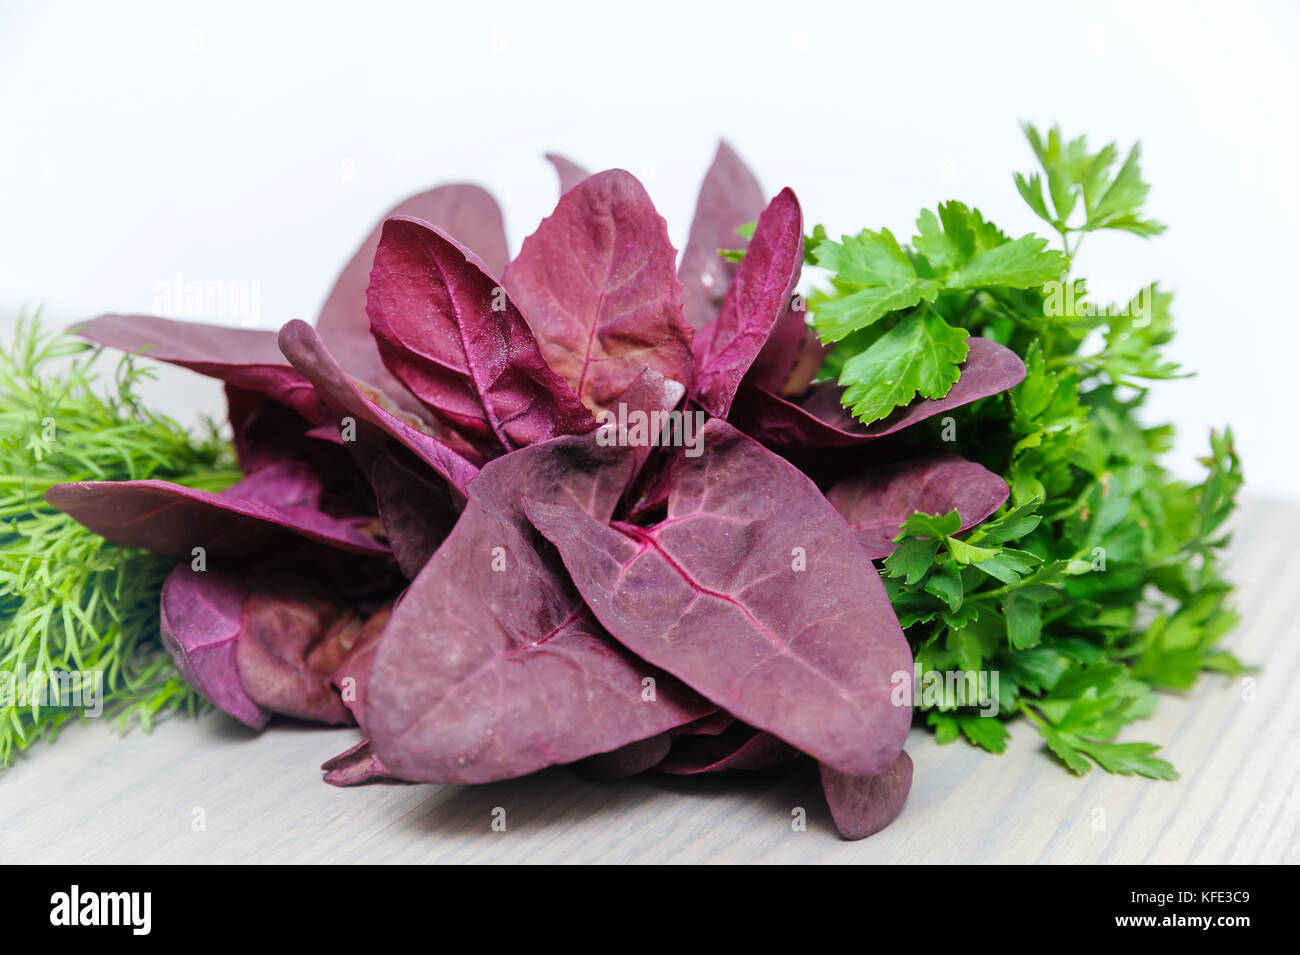 Red spinach, parsley and dill are on a wooden background. Stock Photo